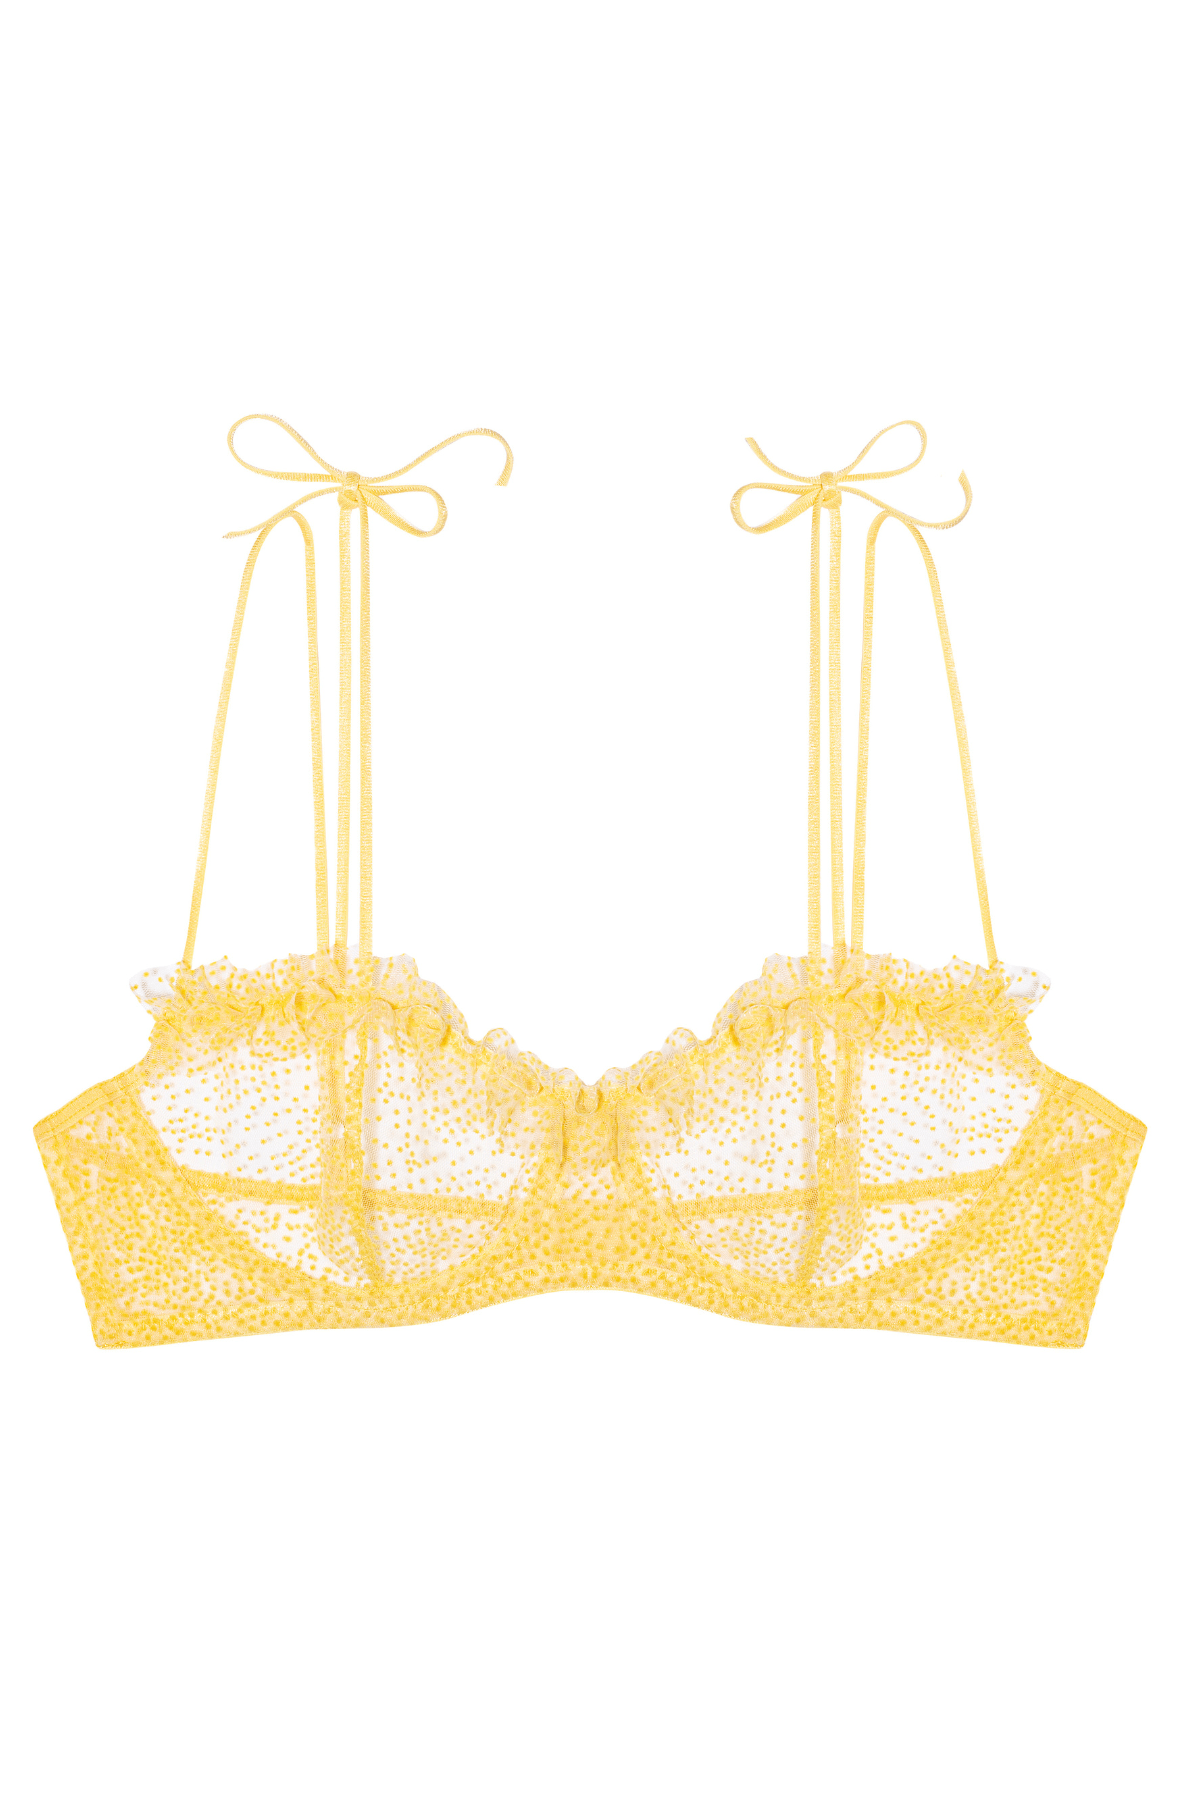 Le Petit Trou Bralette Mimosa Underwire Bra with Frills - Yellow